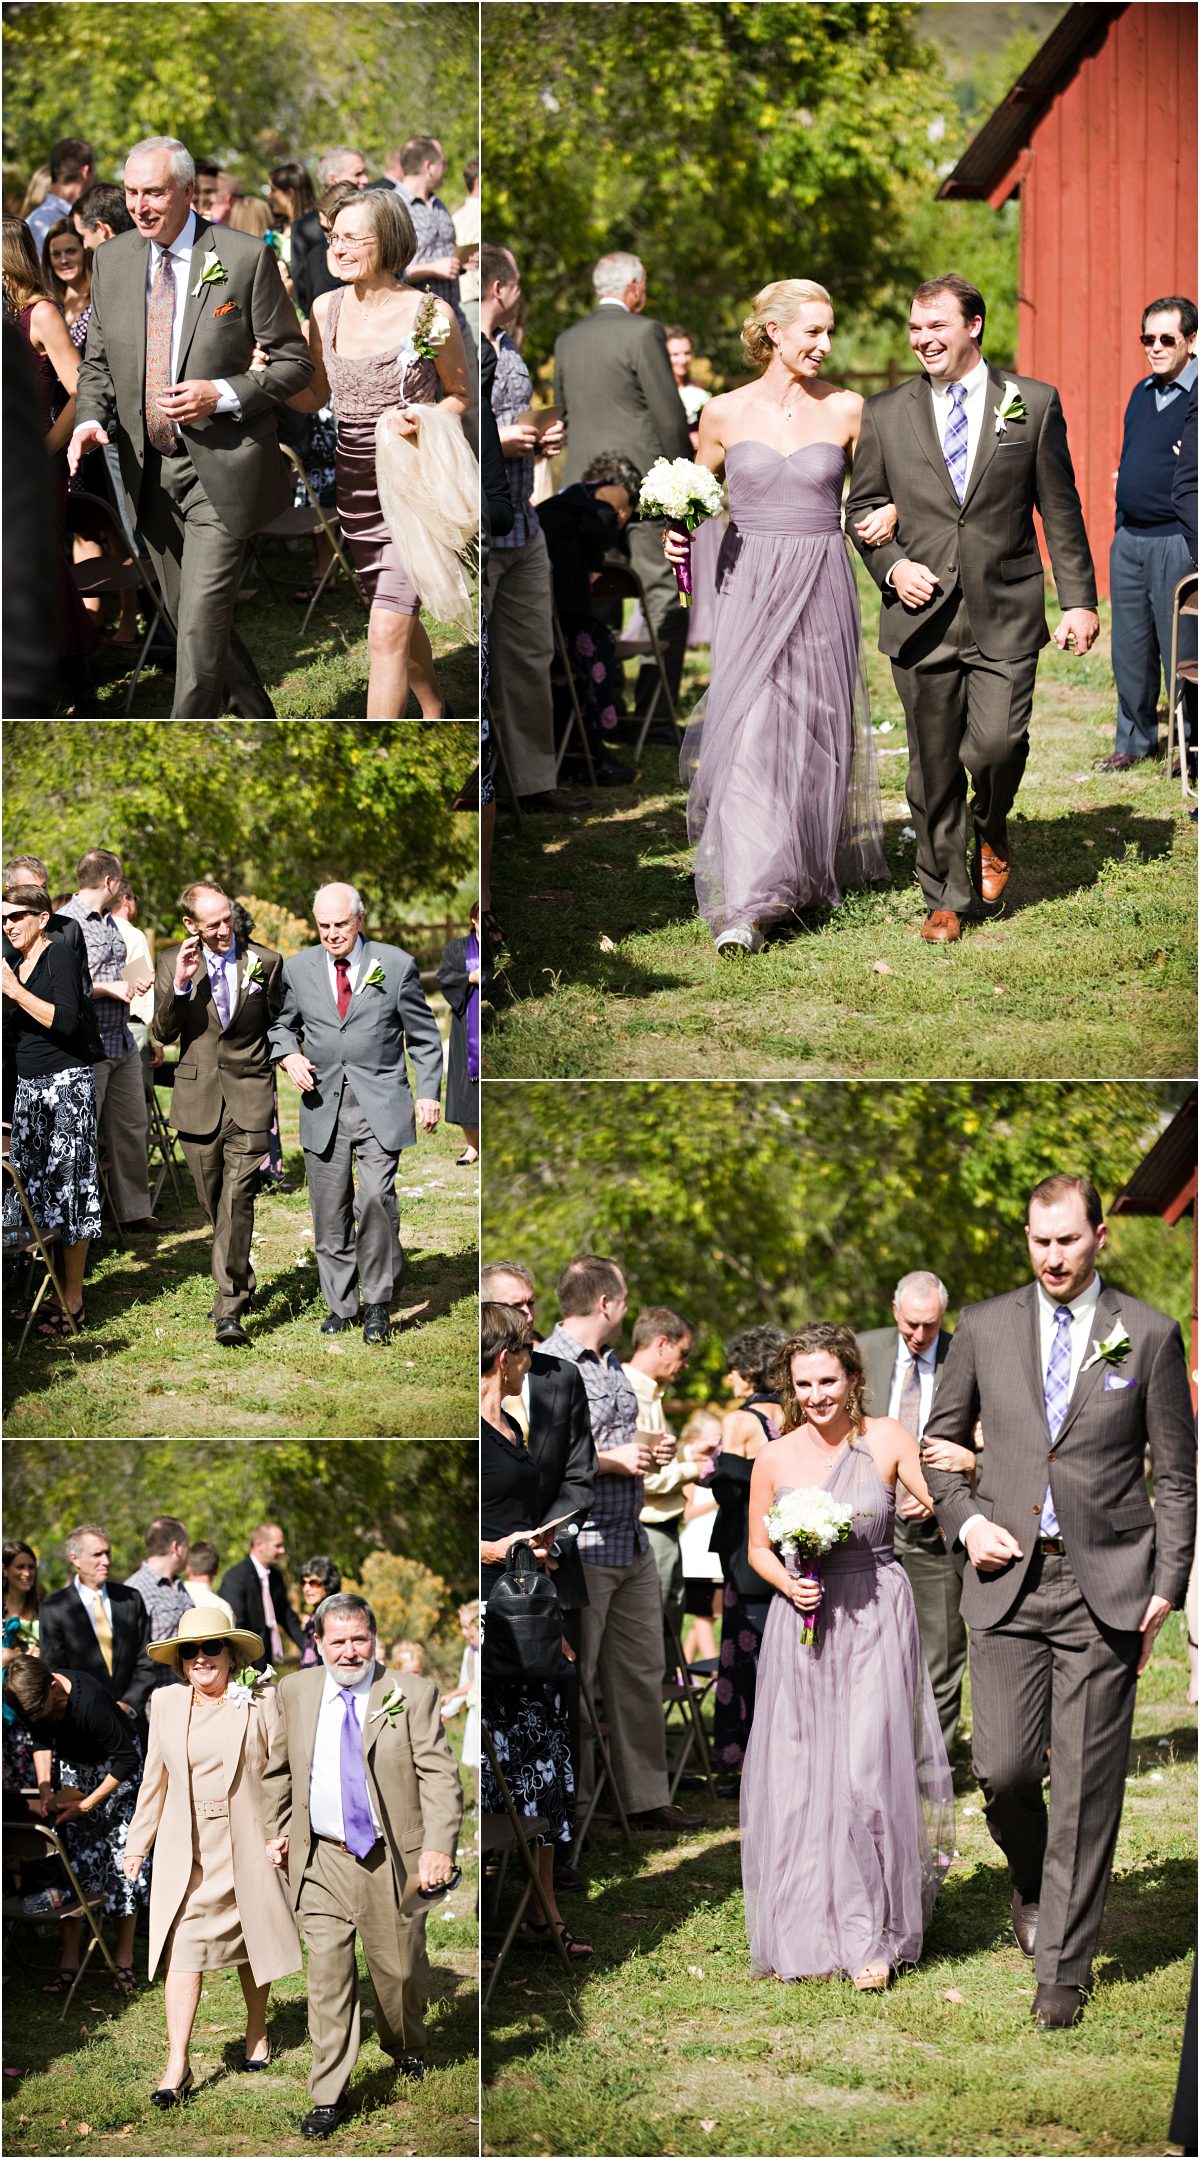 recessional, wedding party,wedding guests, outdoor ceremony in front of rustic red barn at clear creek history park, golden colorado, wedding photographer, colorado wedding planner